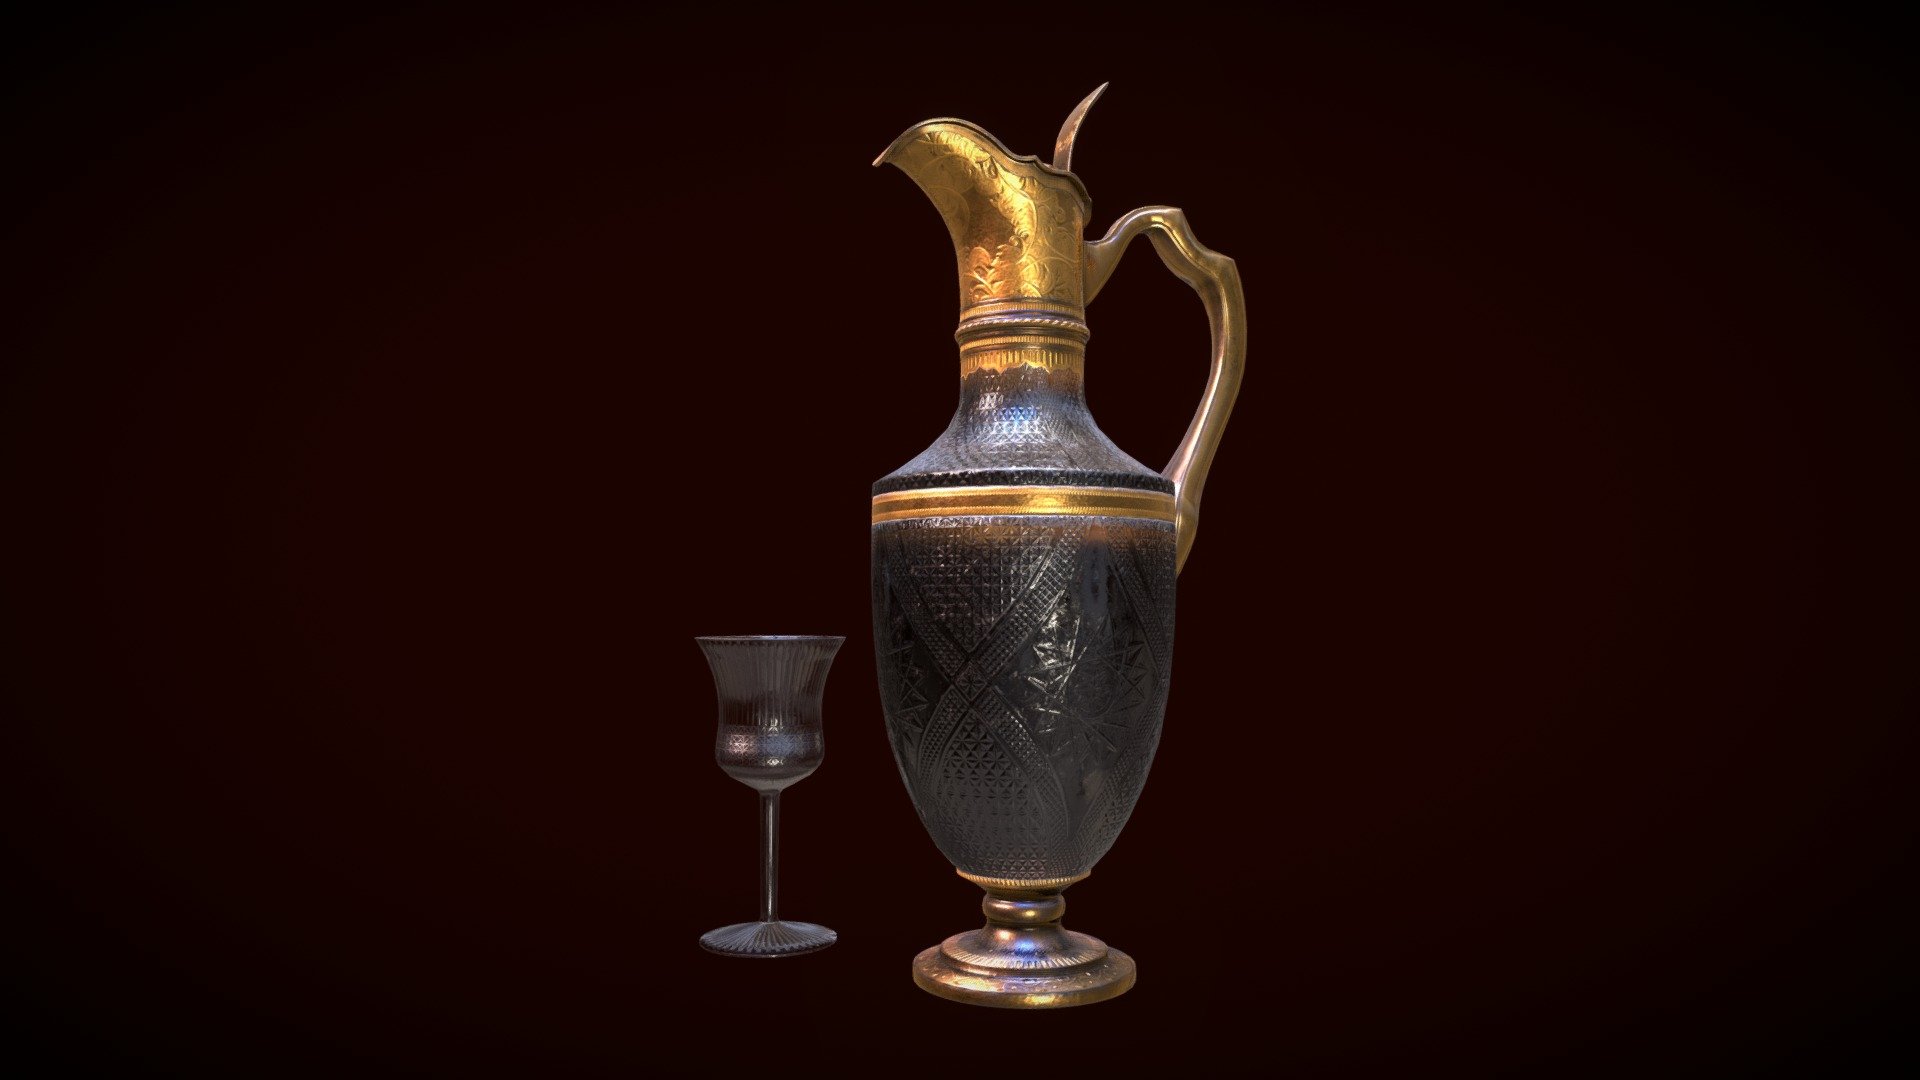 A victorian era jug and wineglass from my victorian still life.
Done with Blender, Substance Designer, Substance Painter and 3D Coat.
For the engravings on the jug, I modeled and rendered the shapes in Blender as a height map and created a trimsheet material which I used in Substance Painter with sphere projection.

To avoid the transparency sorting issues, I gave the glass a little bit of roughness 3d model